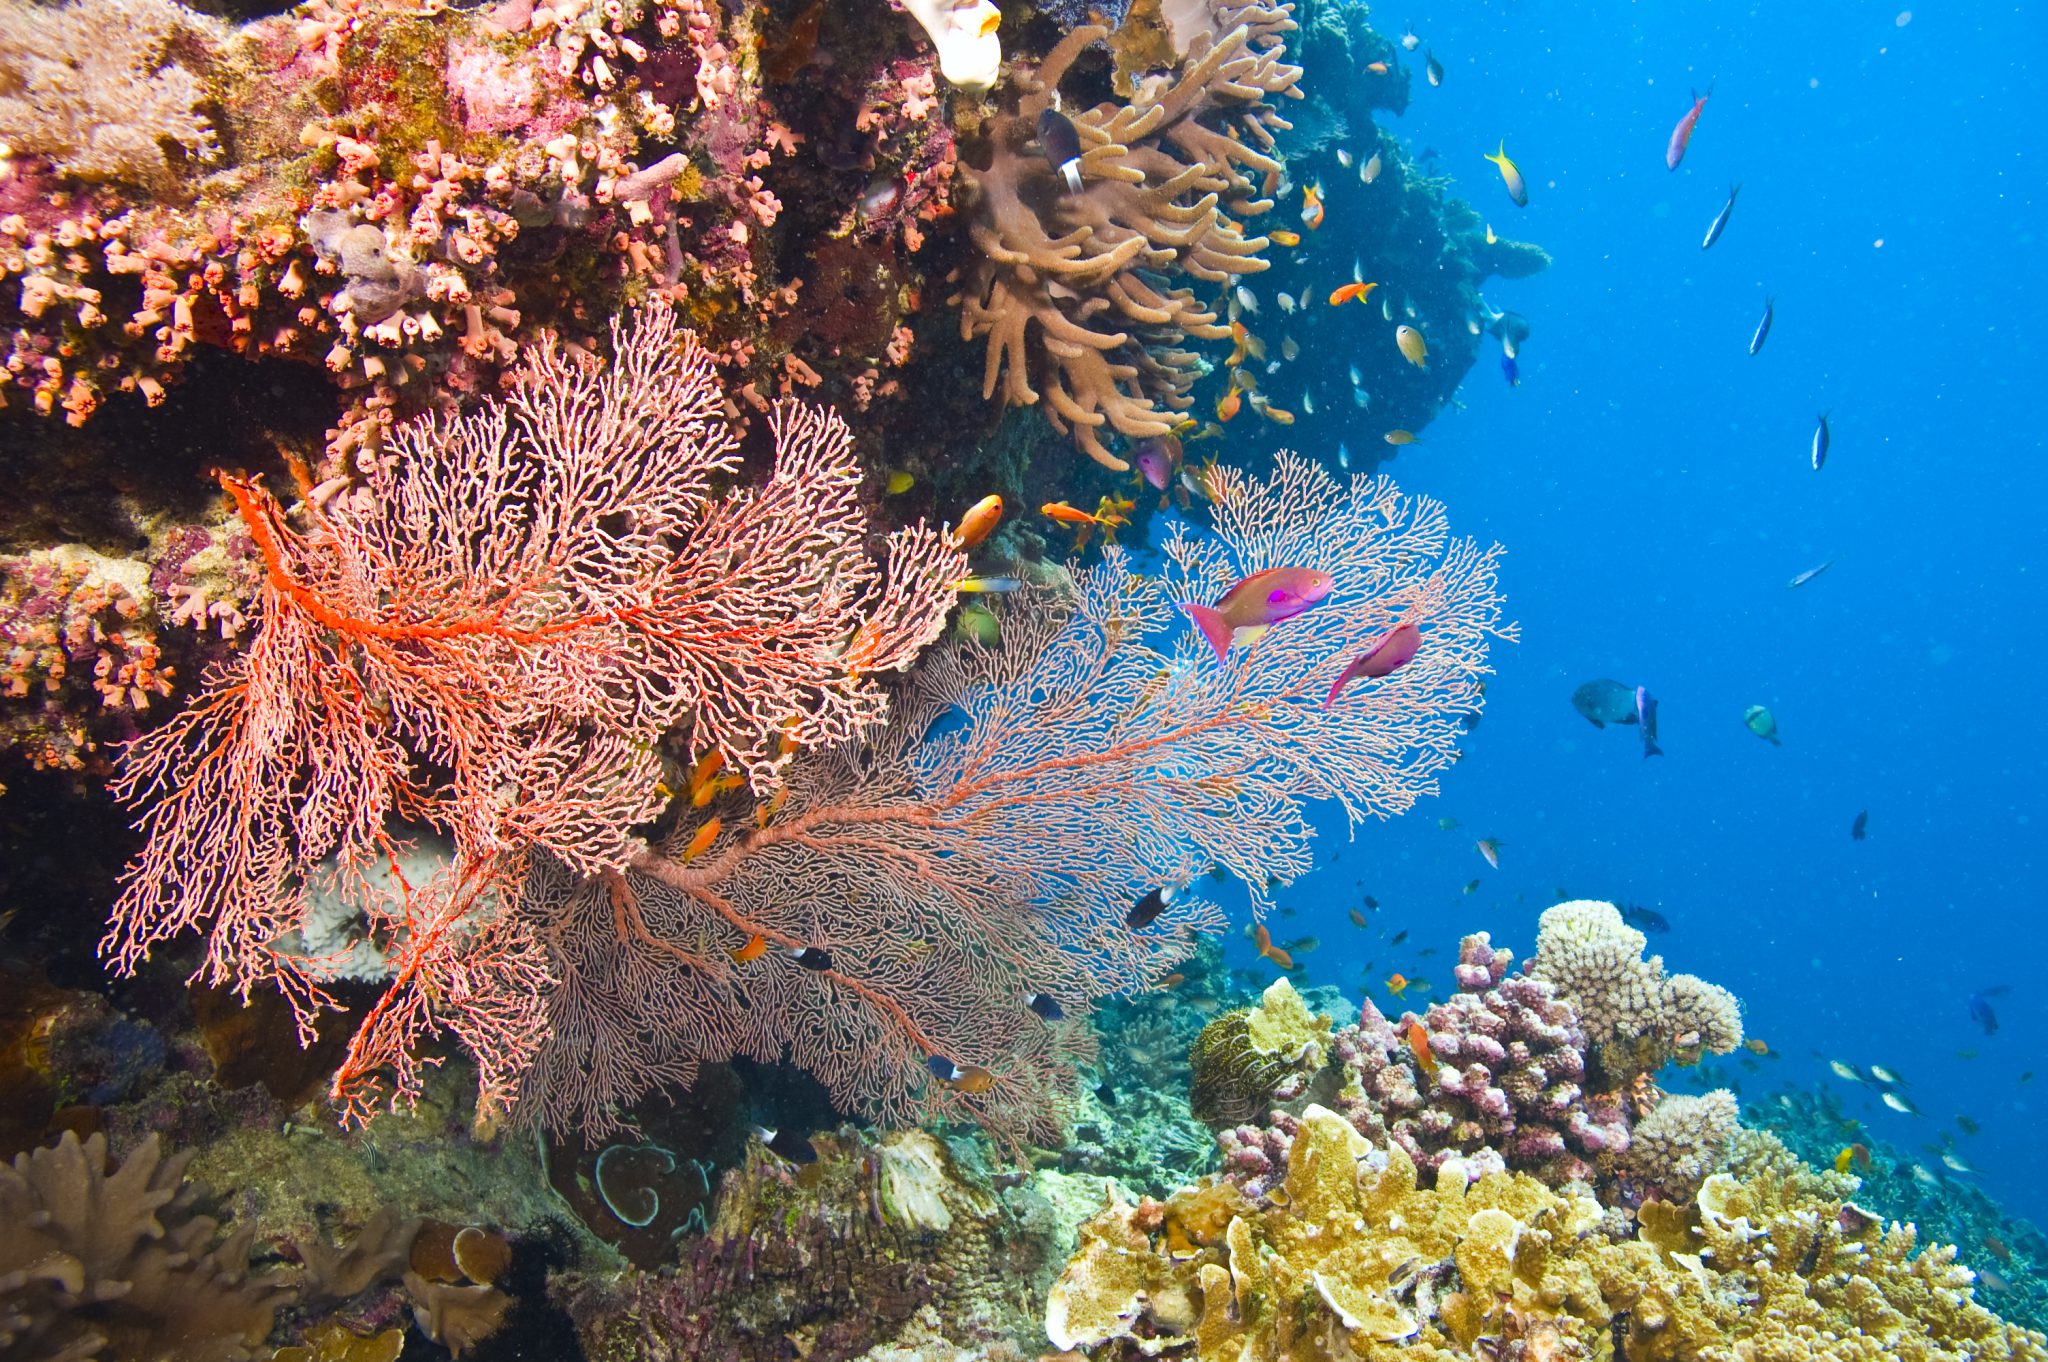 A colorful display of fan corals in the Great Barrier Reef in Australia, one of the best liveaboard dive destinations